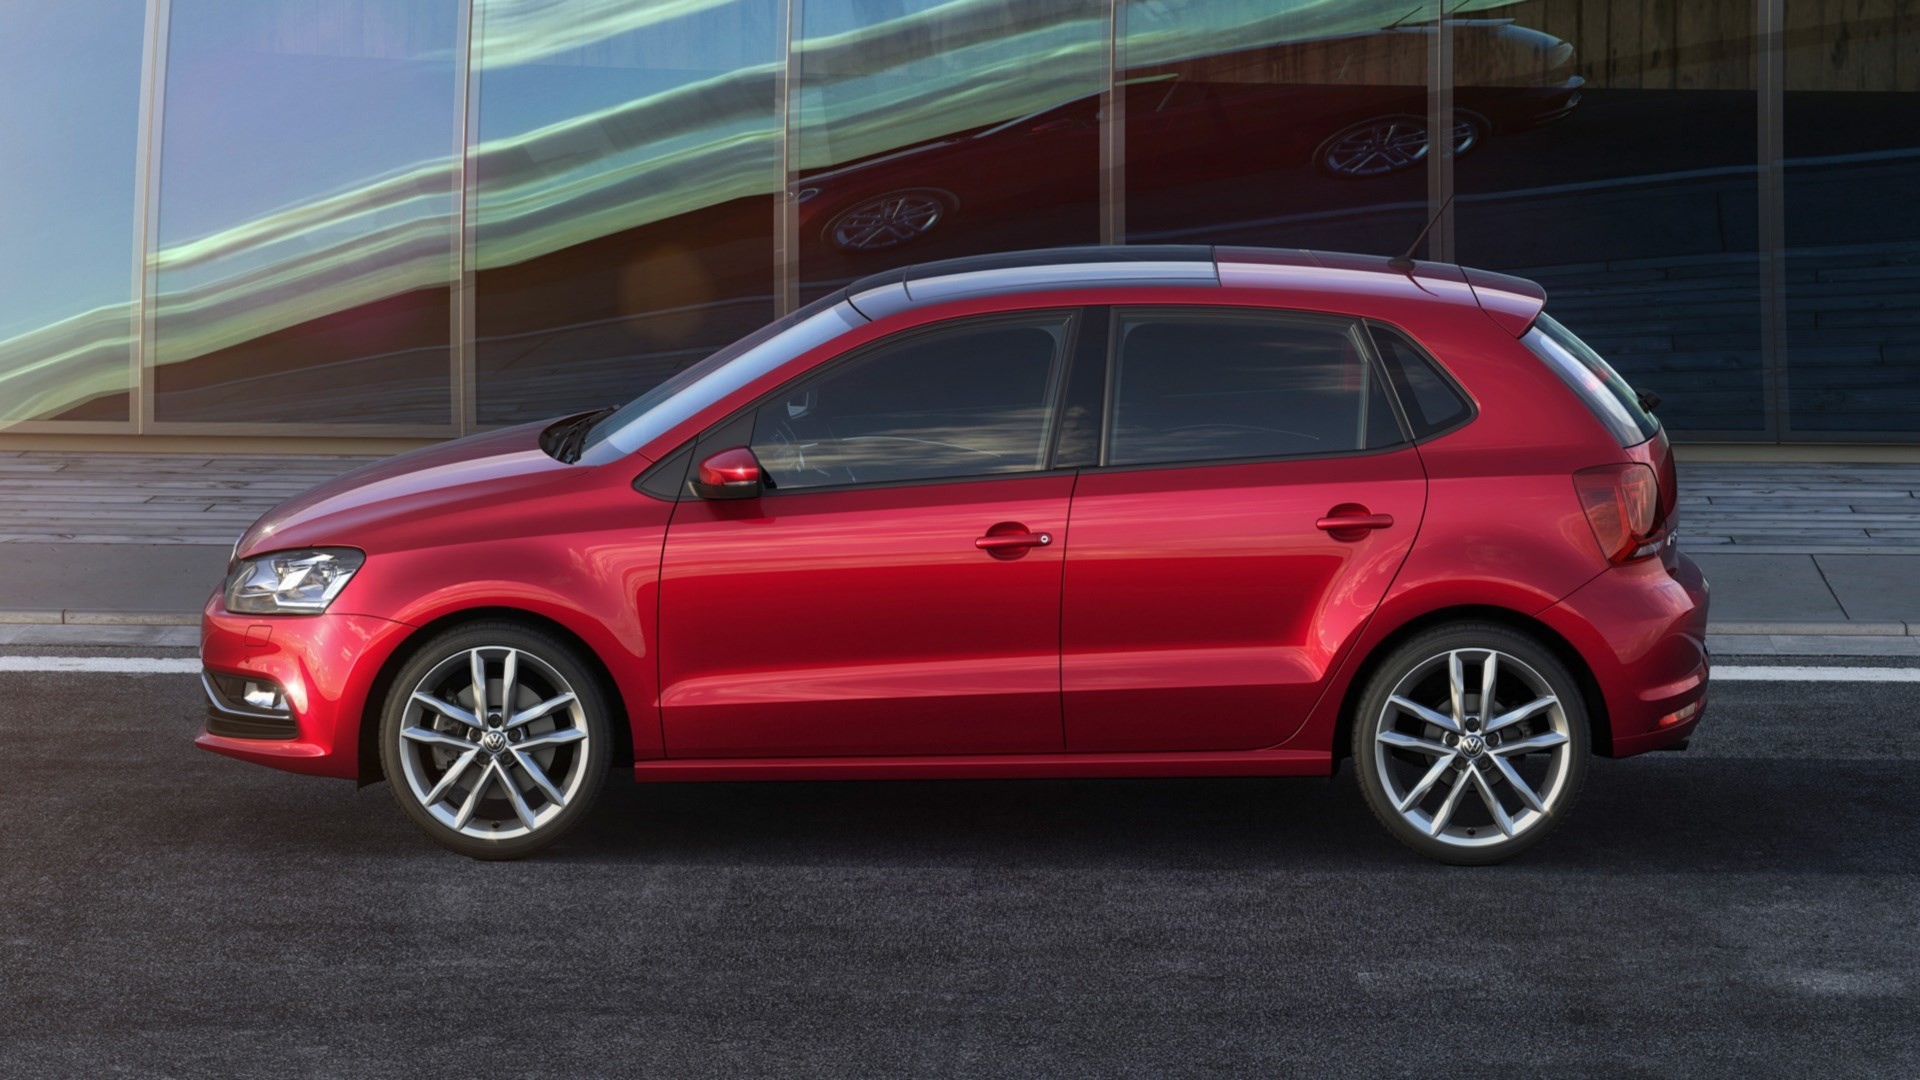 Free screensaver wallpapers for volkswagen polo